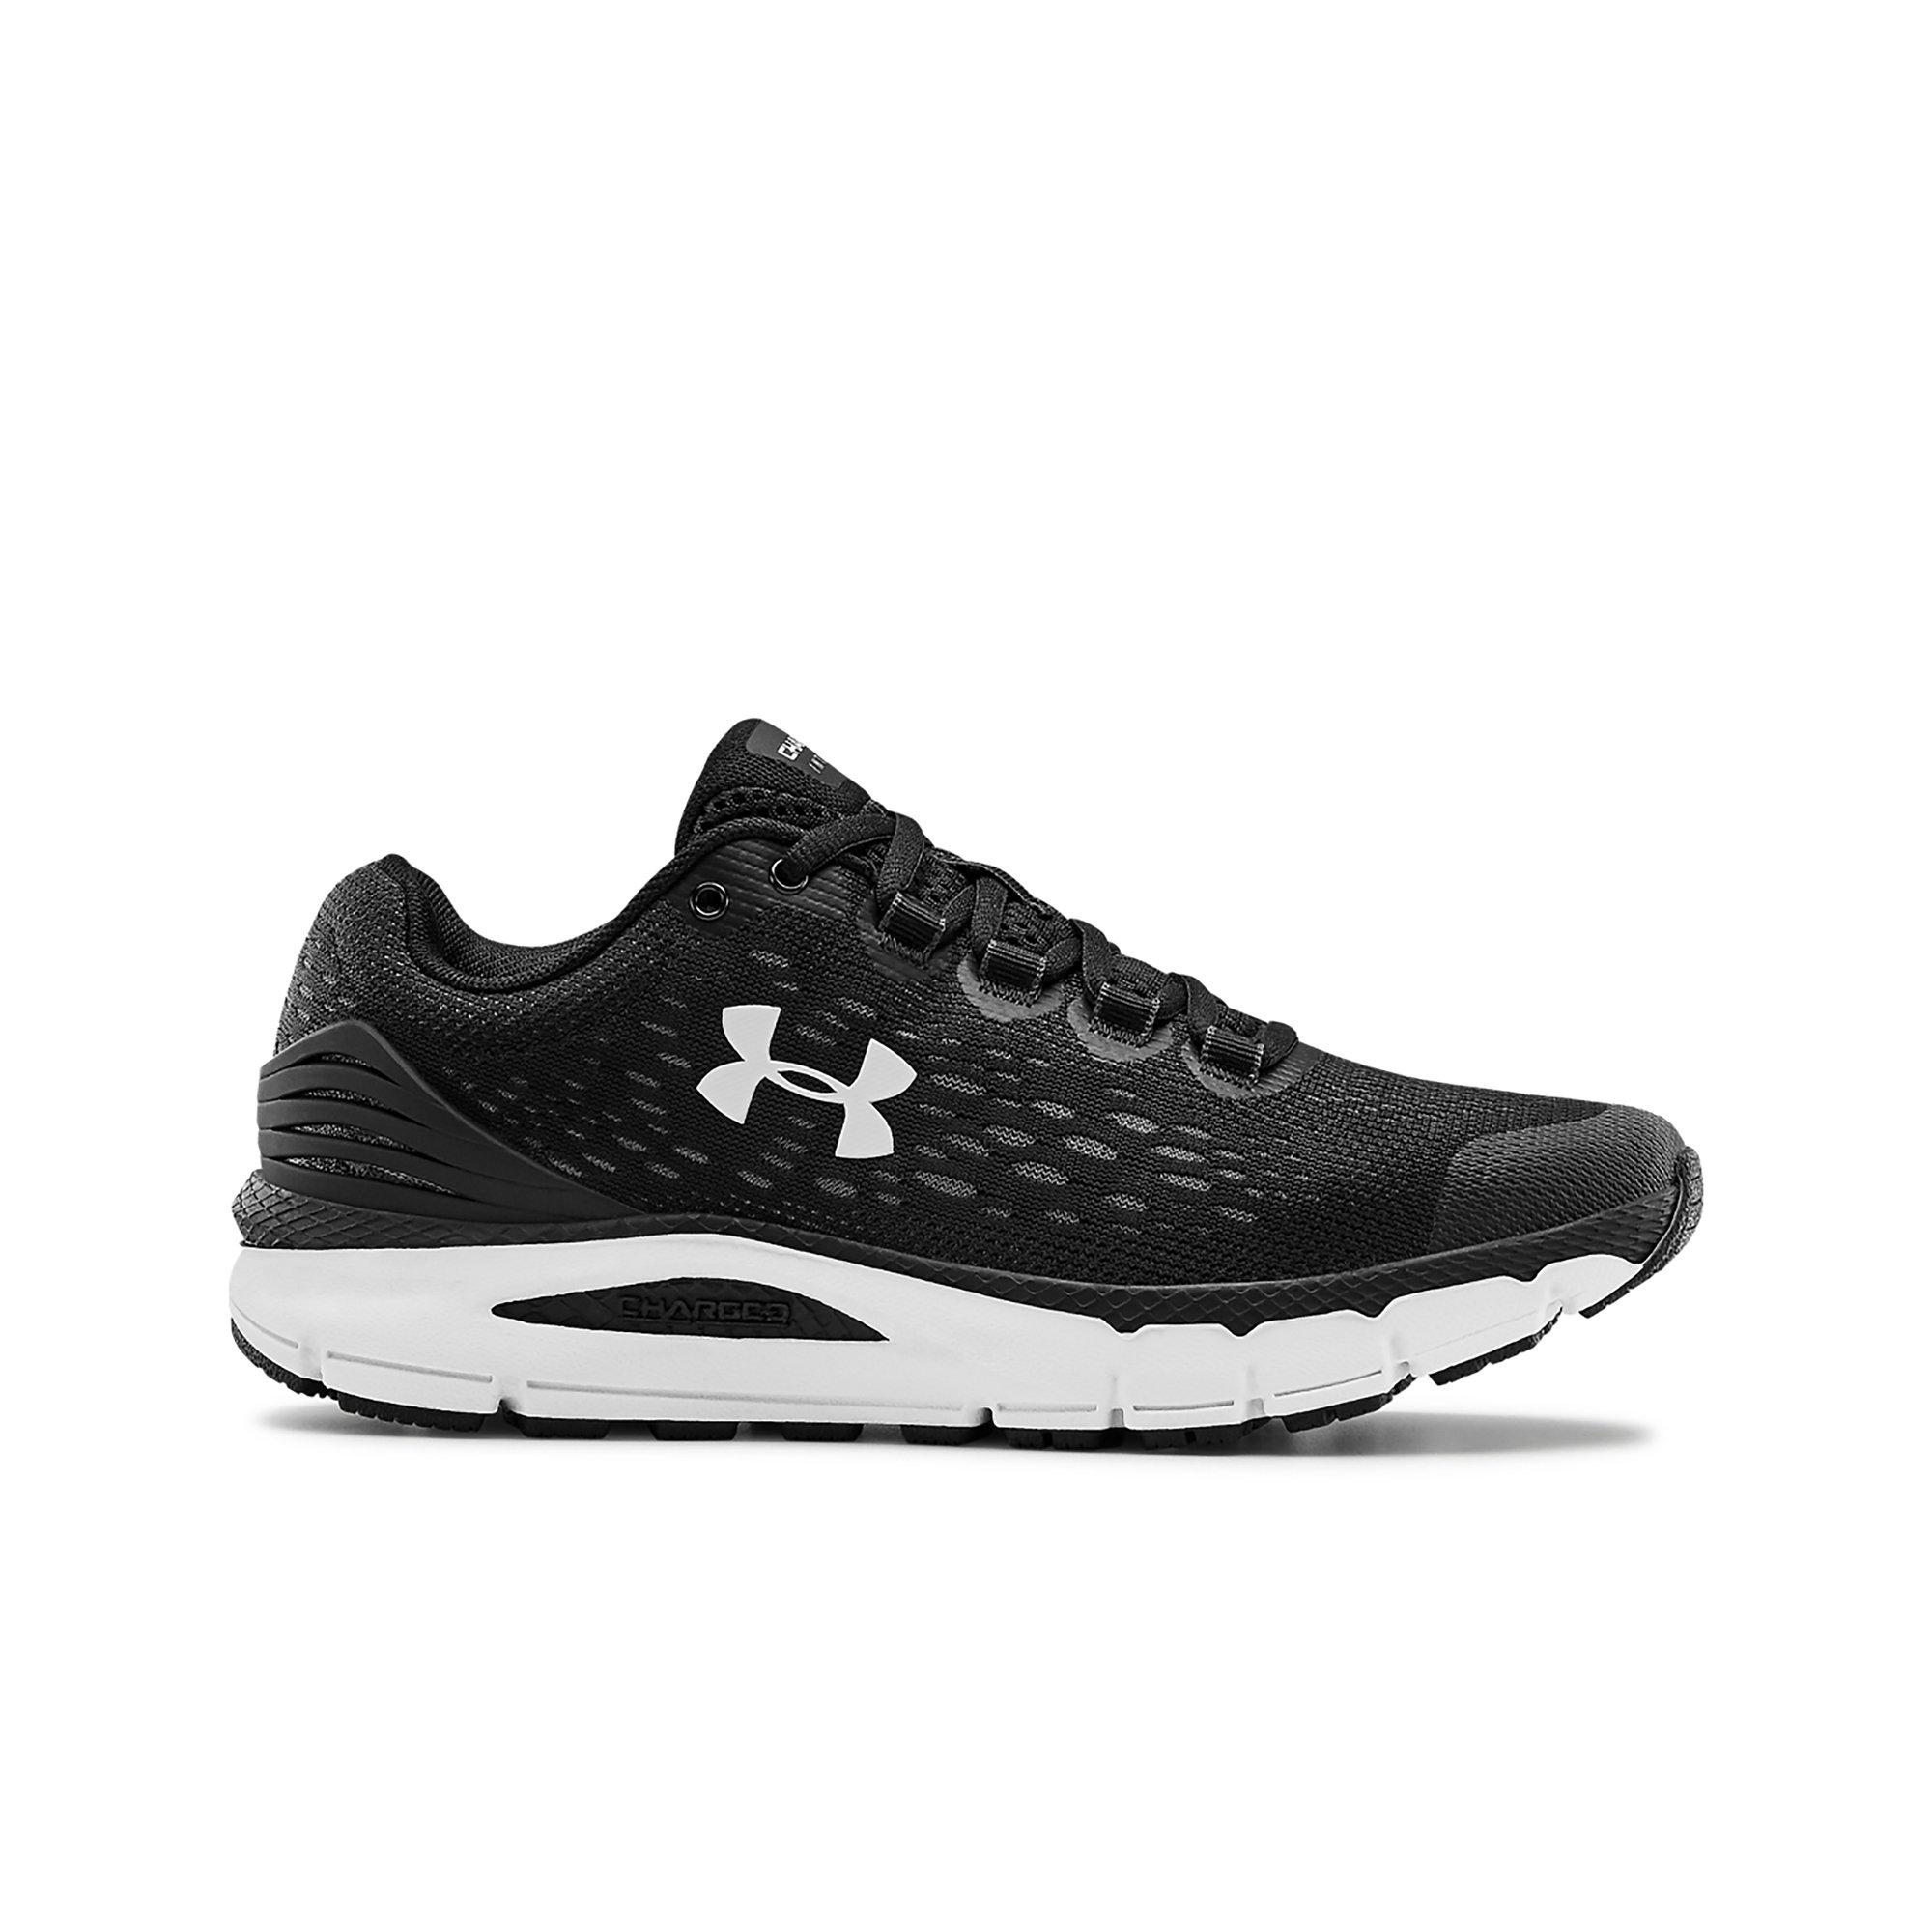 Under Armour Women/'s Charged Intake 4 Running Shoe